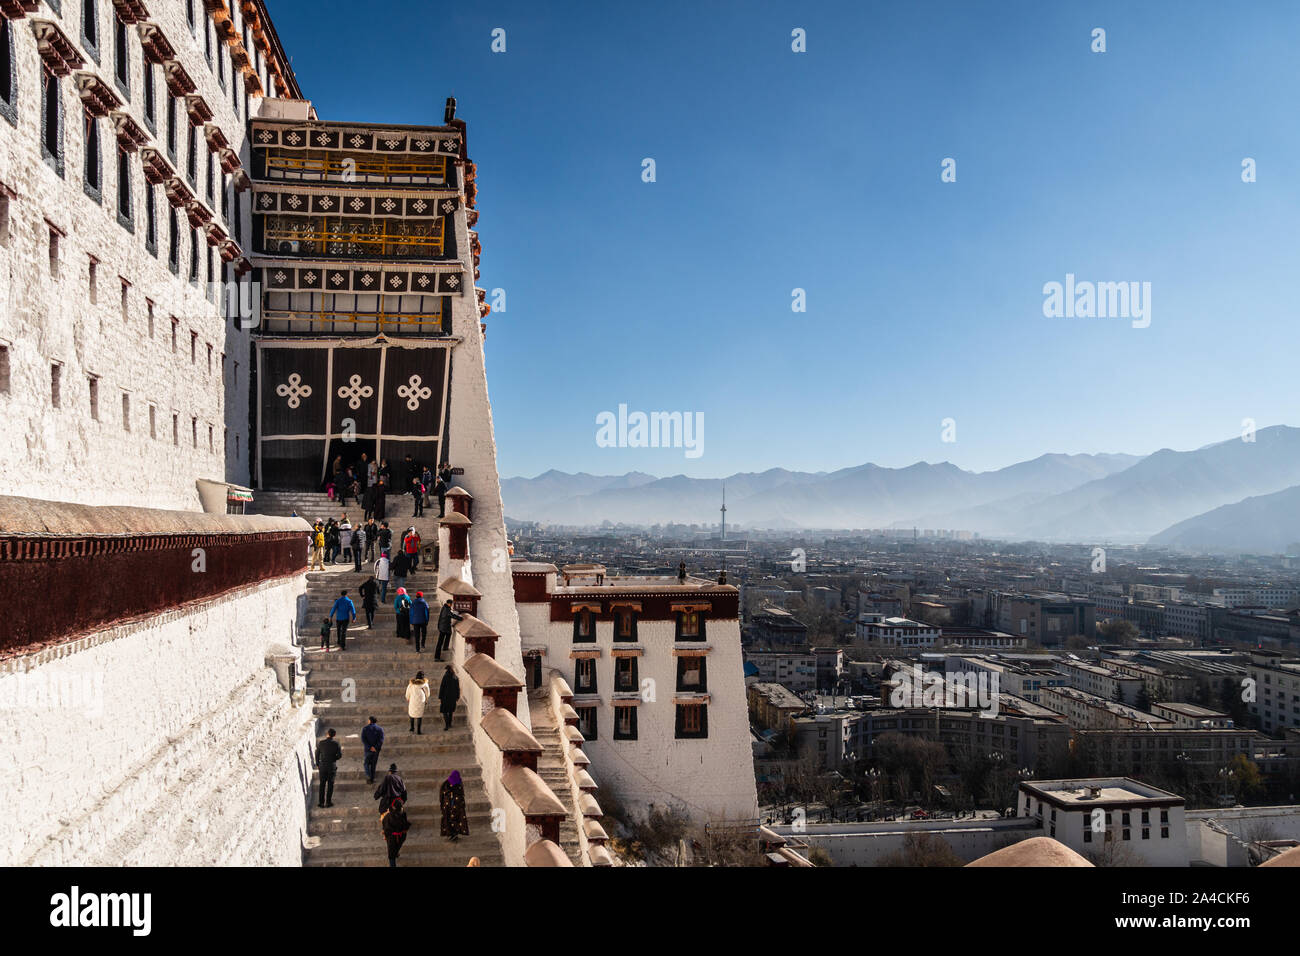 Lhasa, China - December 13 2018: Tourists walk up the stairs leading to the famous Potala Palace in Lhasa old town in Tibet province with the city in Stock Photo